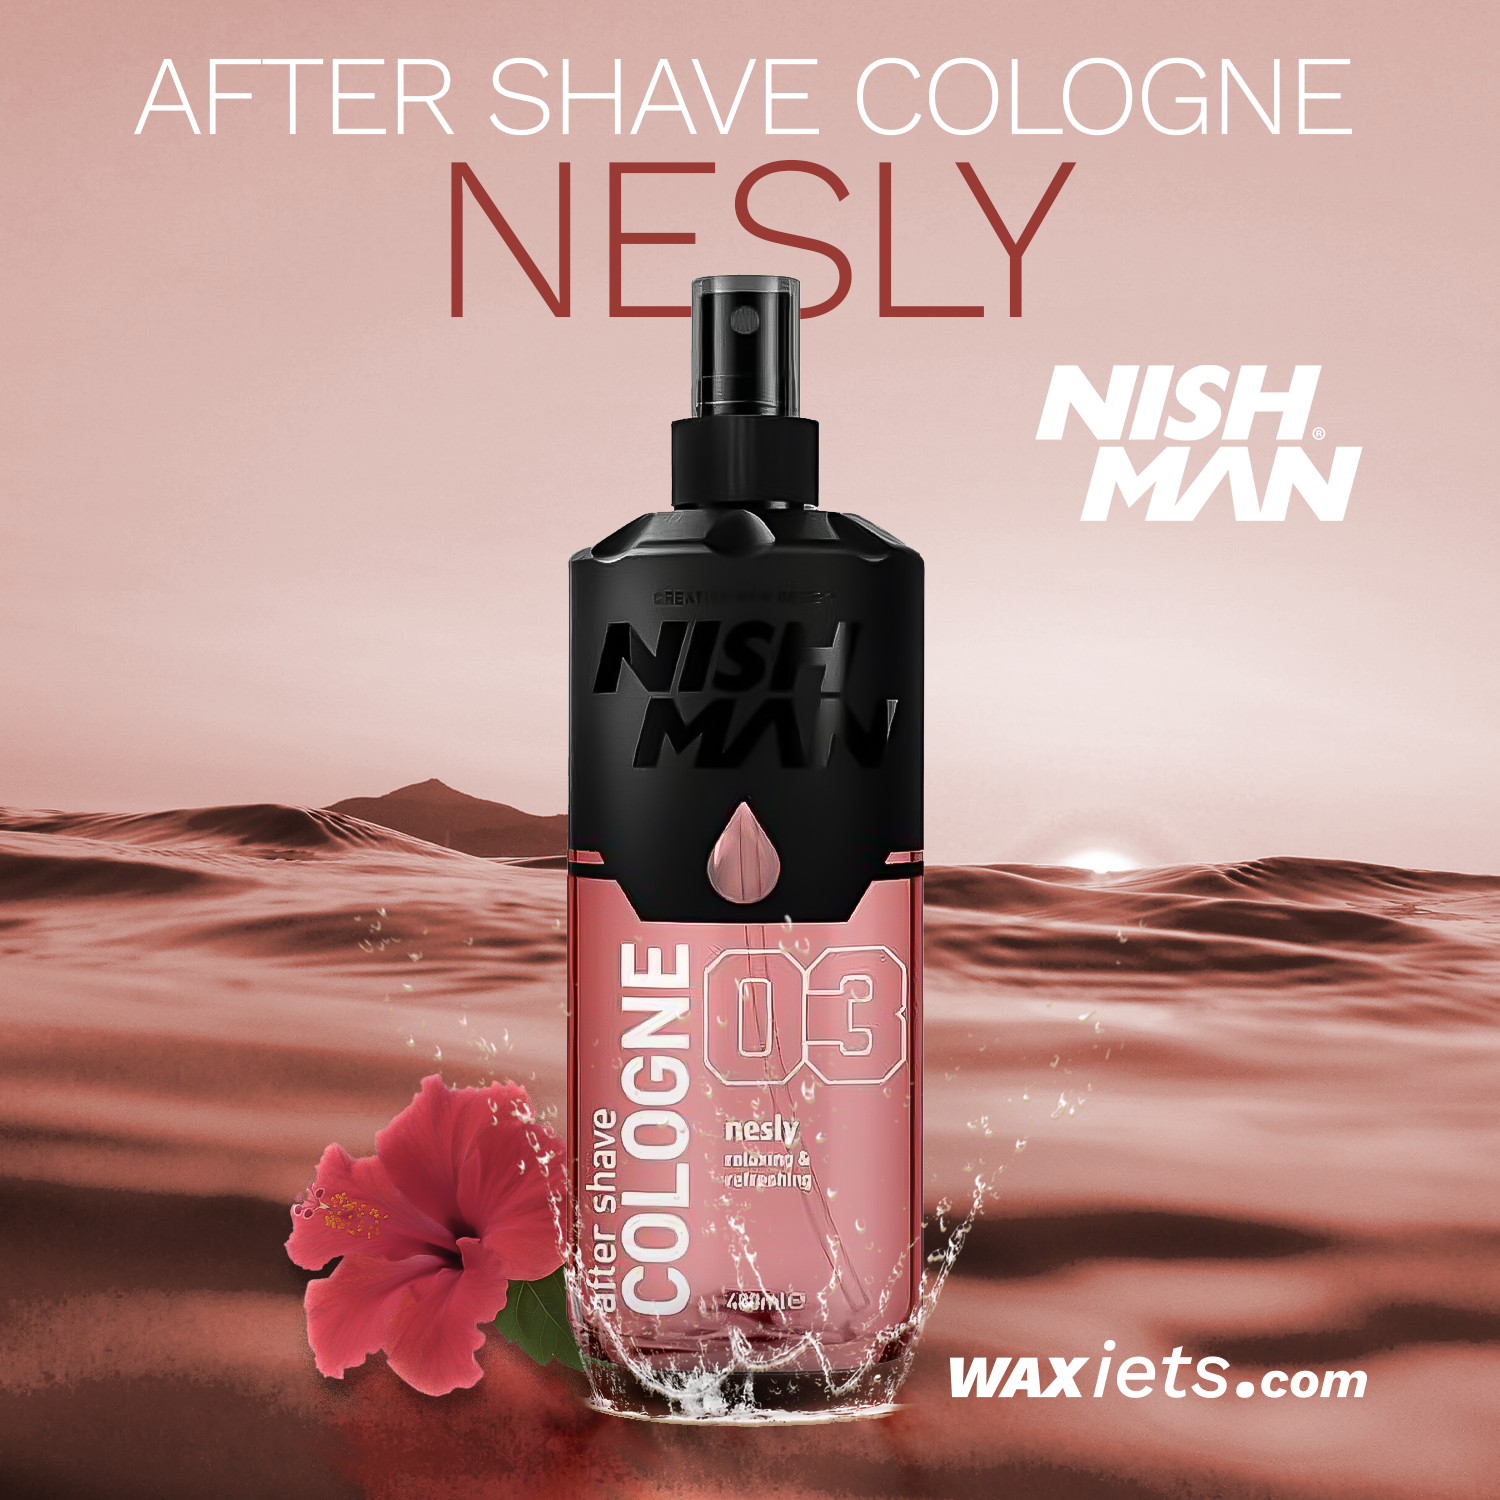 NISH MAN – After Shave Cologne Nesly 3 – 400ml